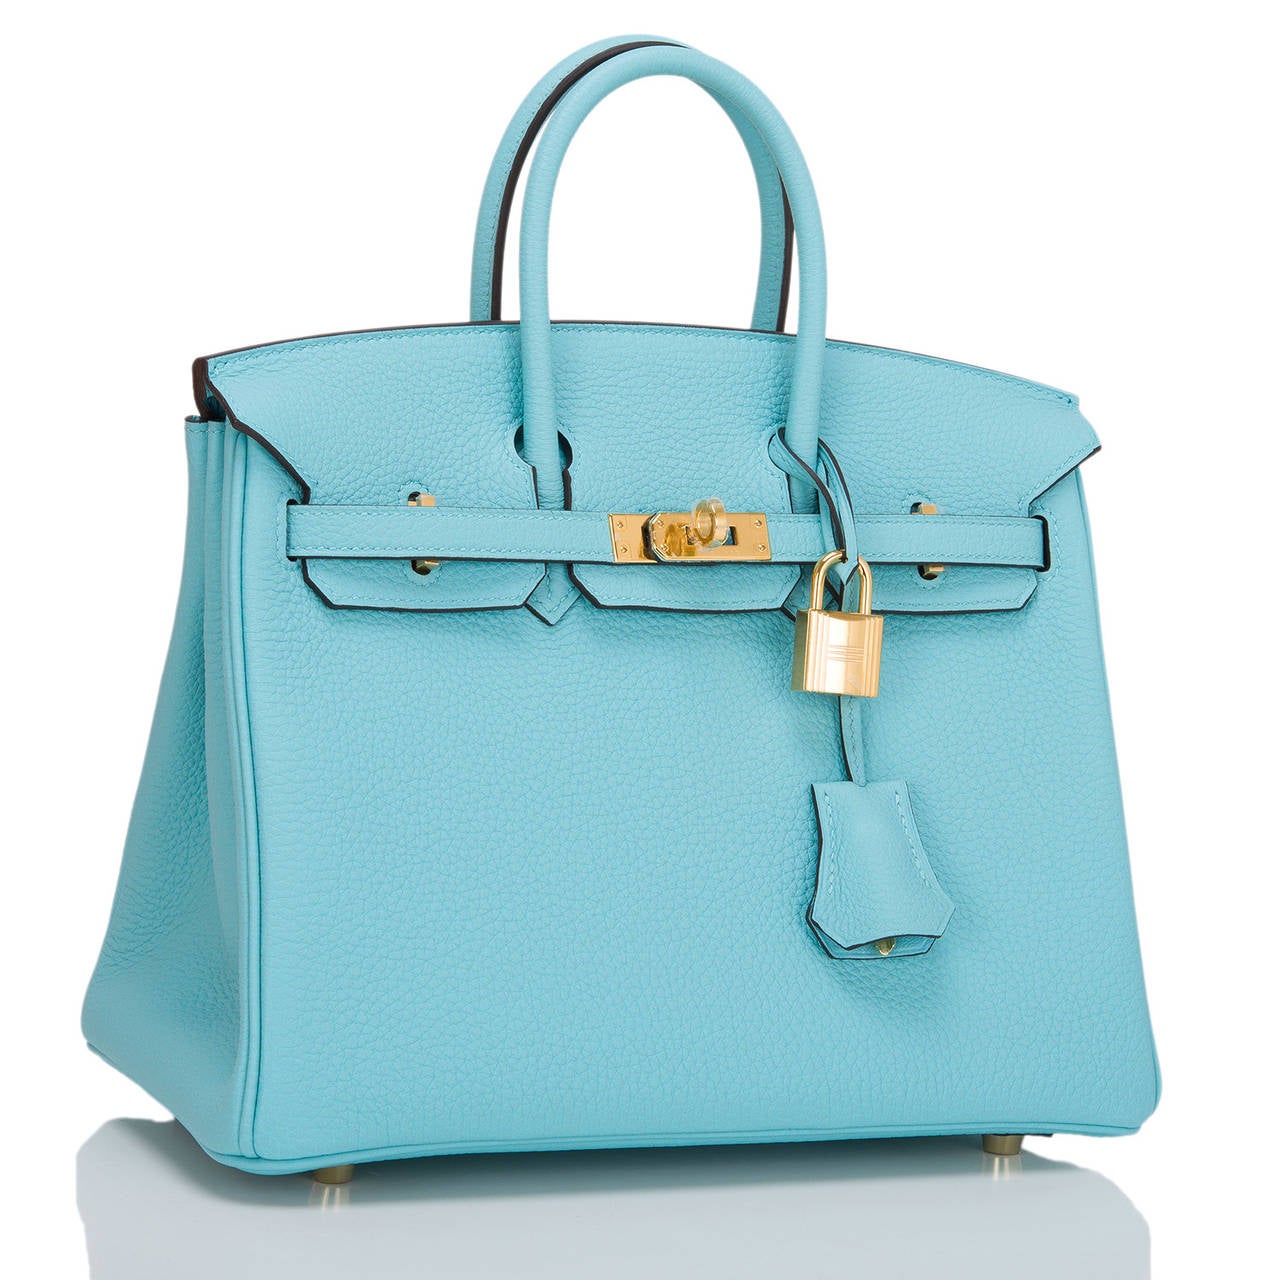 Hermes Blue Atoll Birkin 25cm in togo leather with gold hardware.

This style features tonal stitching, front toggle closure, clochette with lock and two keys, and double rolled handles.

The interior is lined in Blue Atoll chevre with one zip